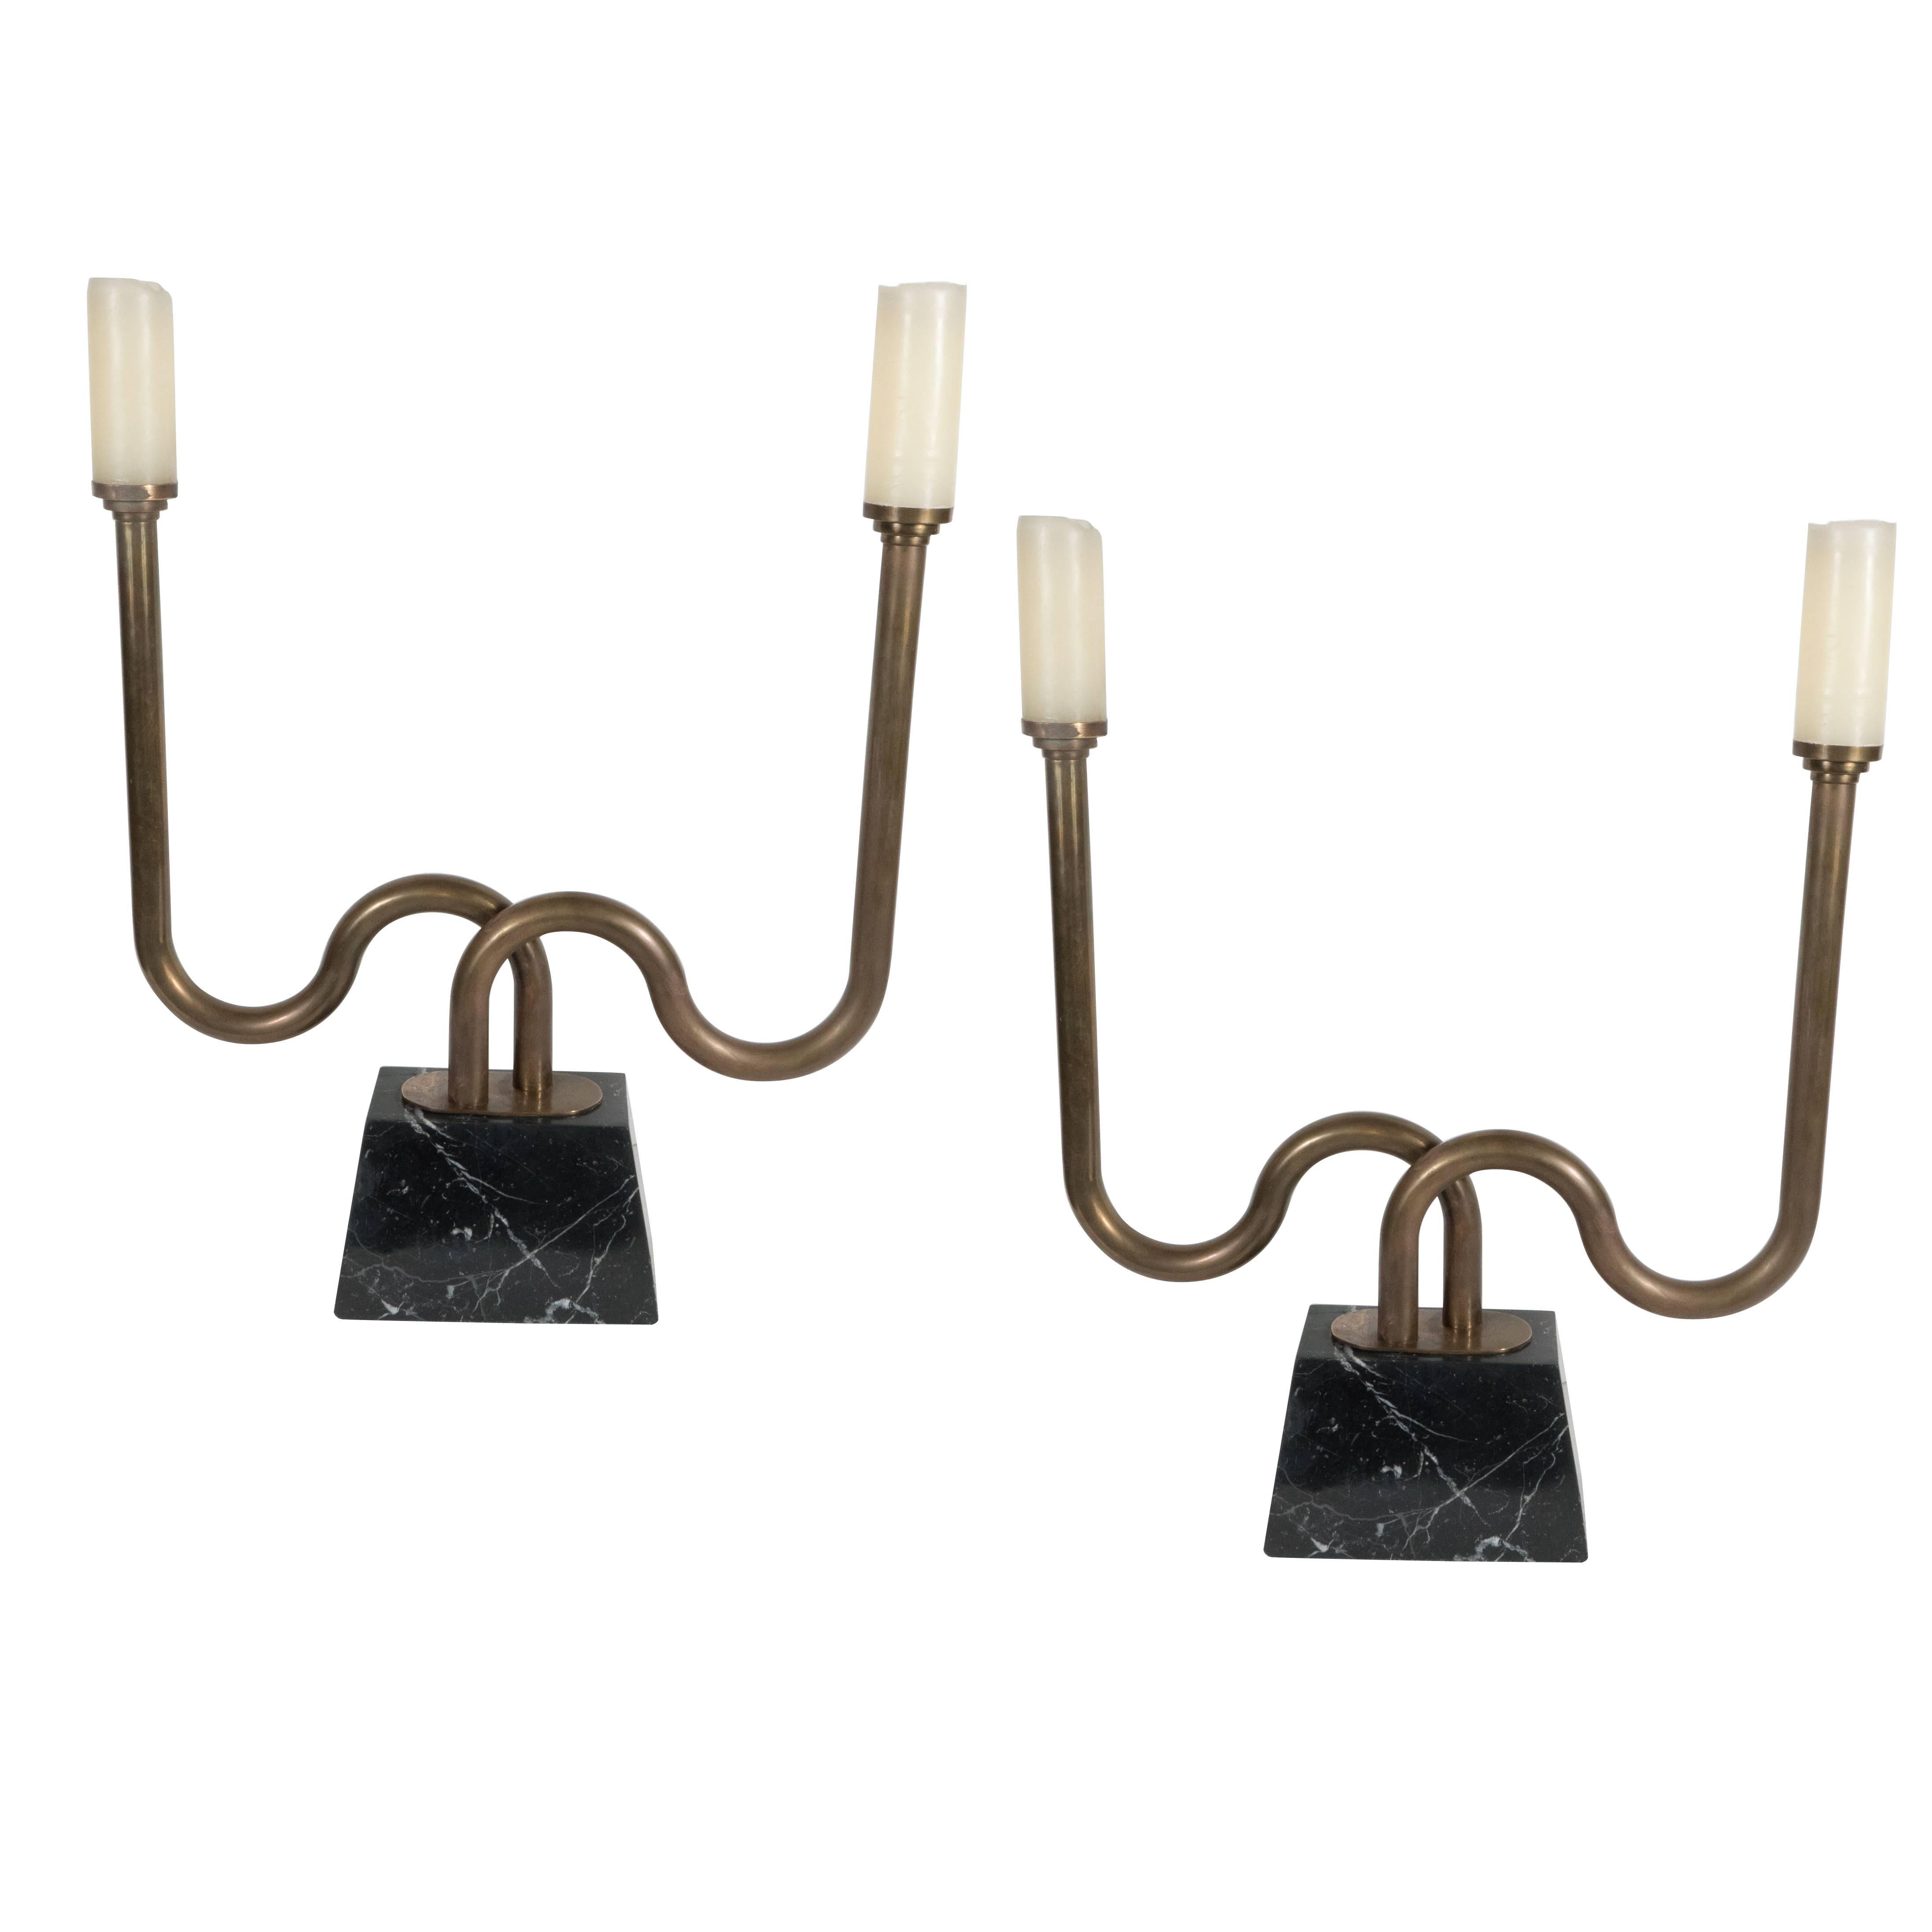 Pair of Mid-Century Modernist Bronze Candlesticks with Polished Marble Bases